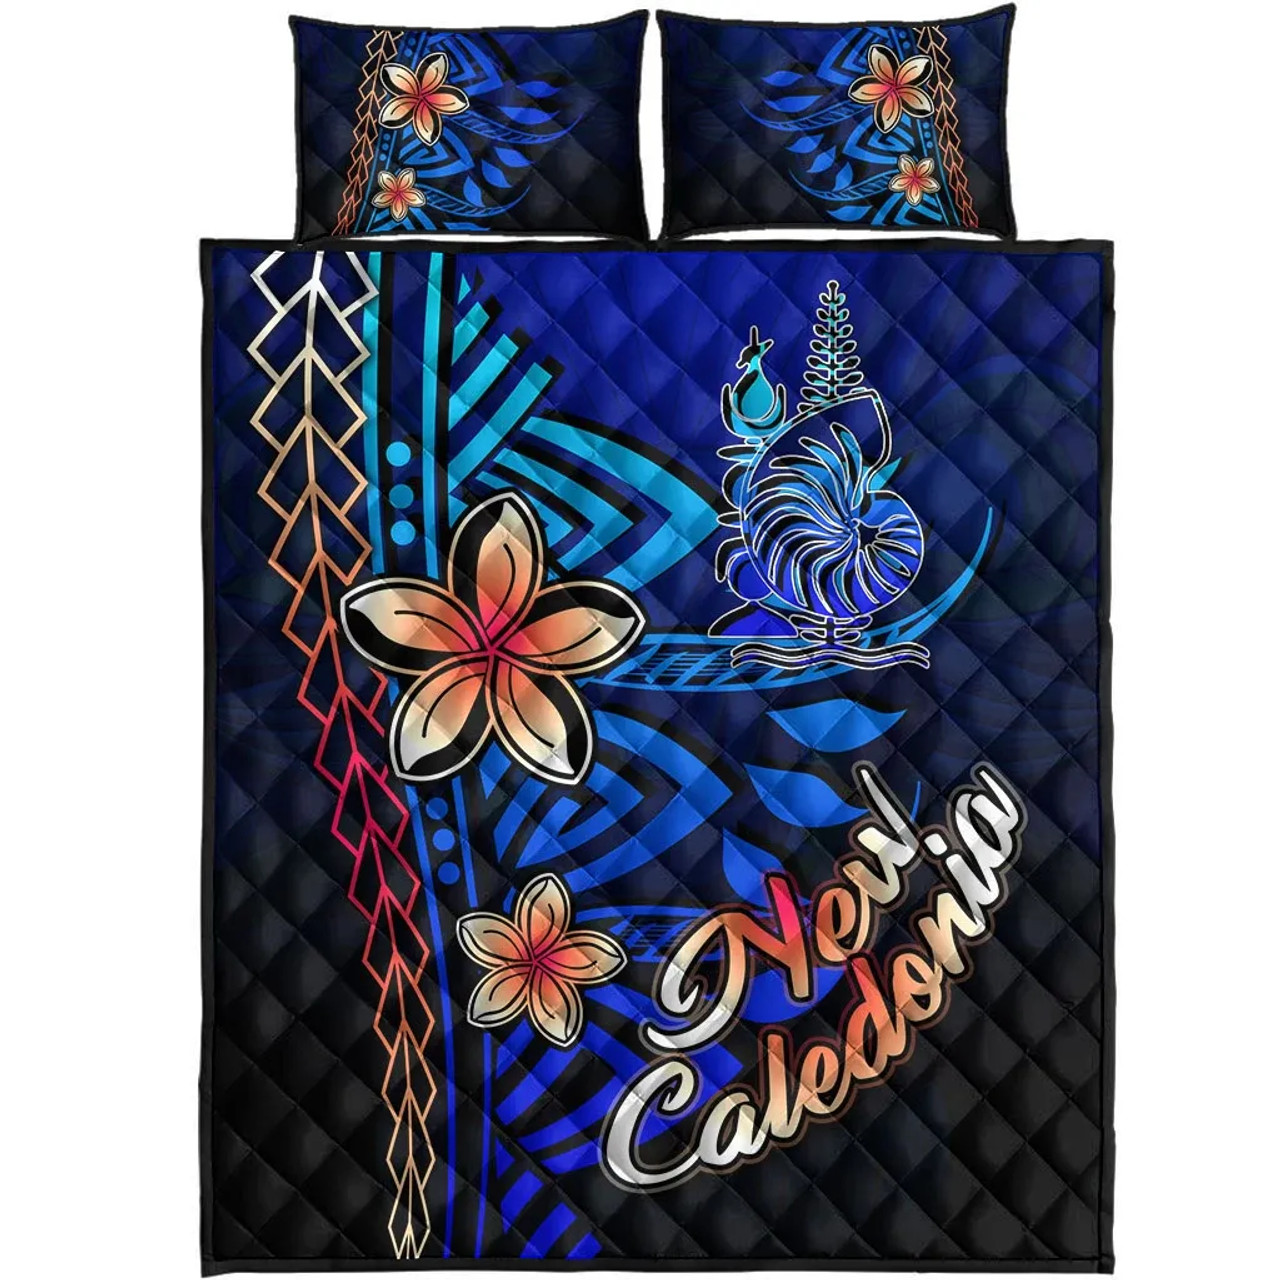 New Caledonia Quilt Bed Set - Vintage Tribal Mountain 5